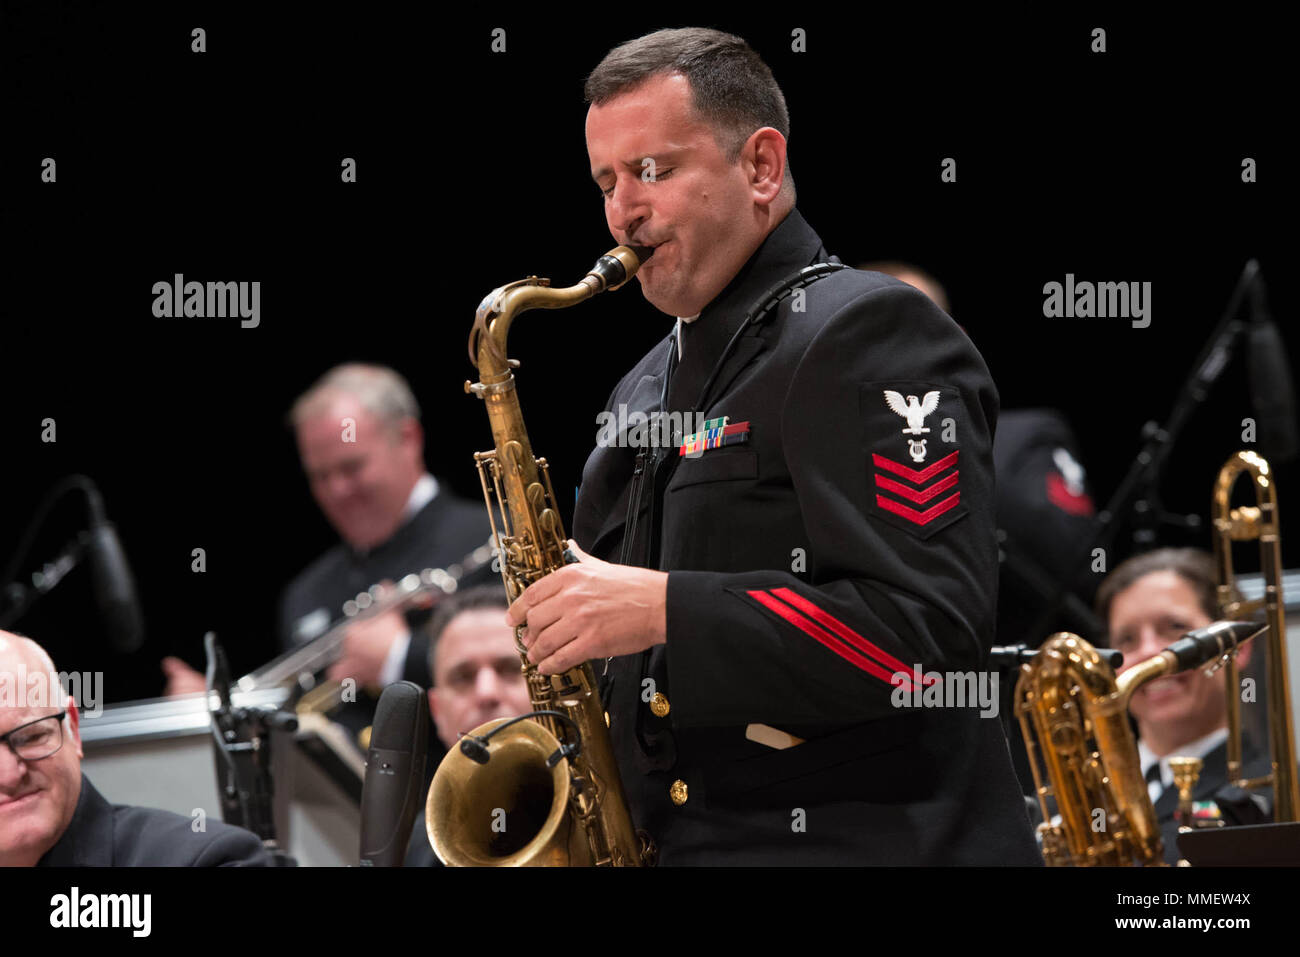 171027-N-NW255-2067 FORT WORTH, Texas (October 27, 2017) Musician 1st Class Manuel Pelayo de Gongora solos with the U.S. Navy Band Commodores jazz ensemble in a performance at Texas Christian University's Ed Landreth Auditorium. The band is on a 22-day national tour through six states, reaching audiences in parts of the country that might not see the Navy on a regular basis. (U.S. Navy photo by Senior Chief Musician Melissa Bishop/Released) Stock Photo